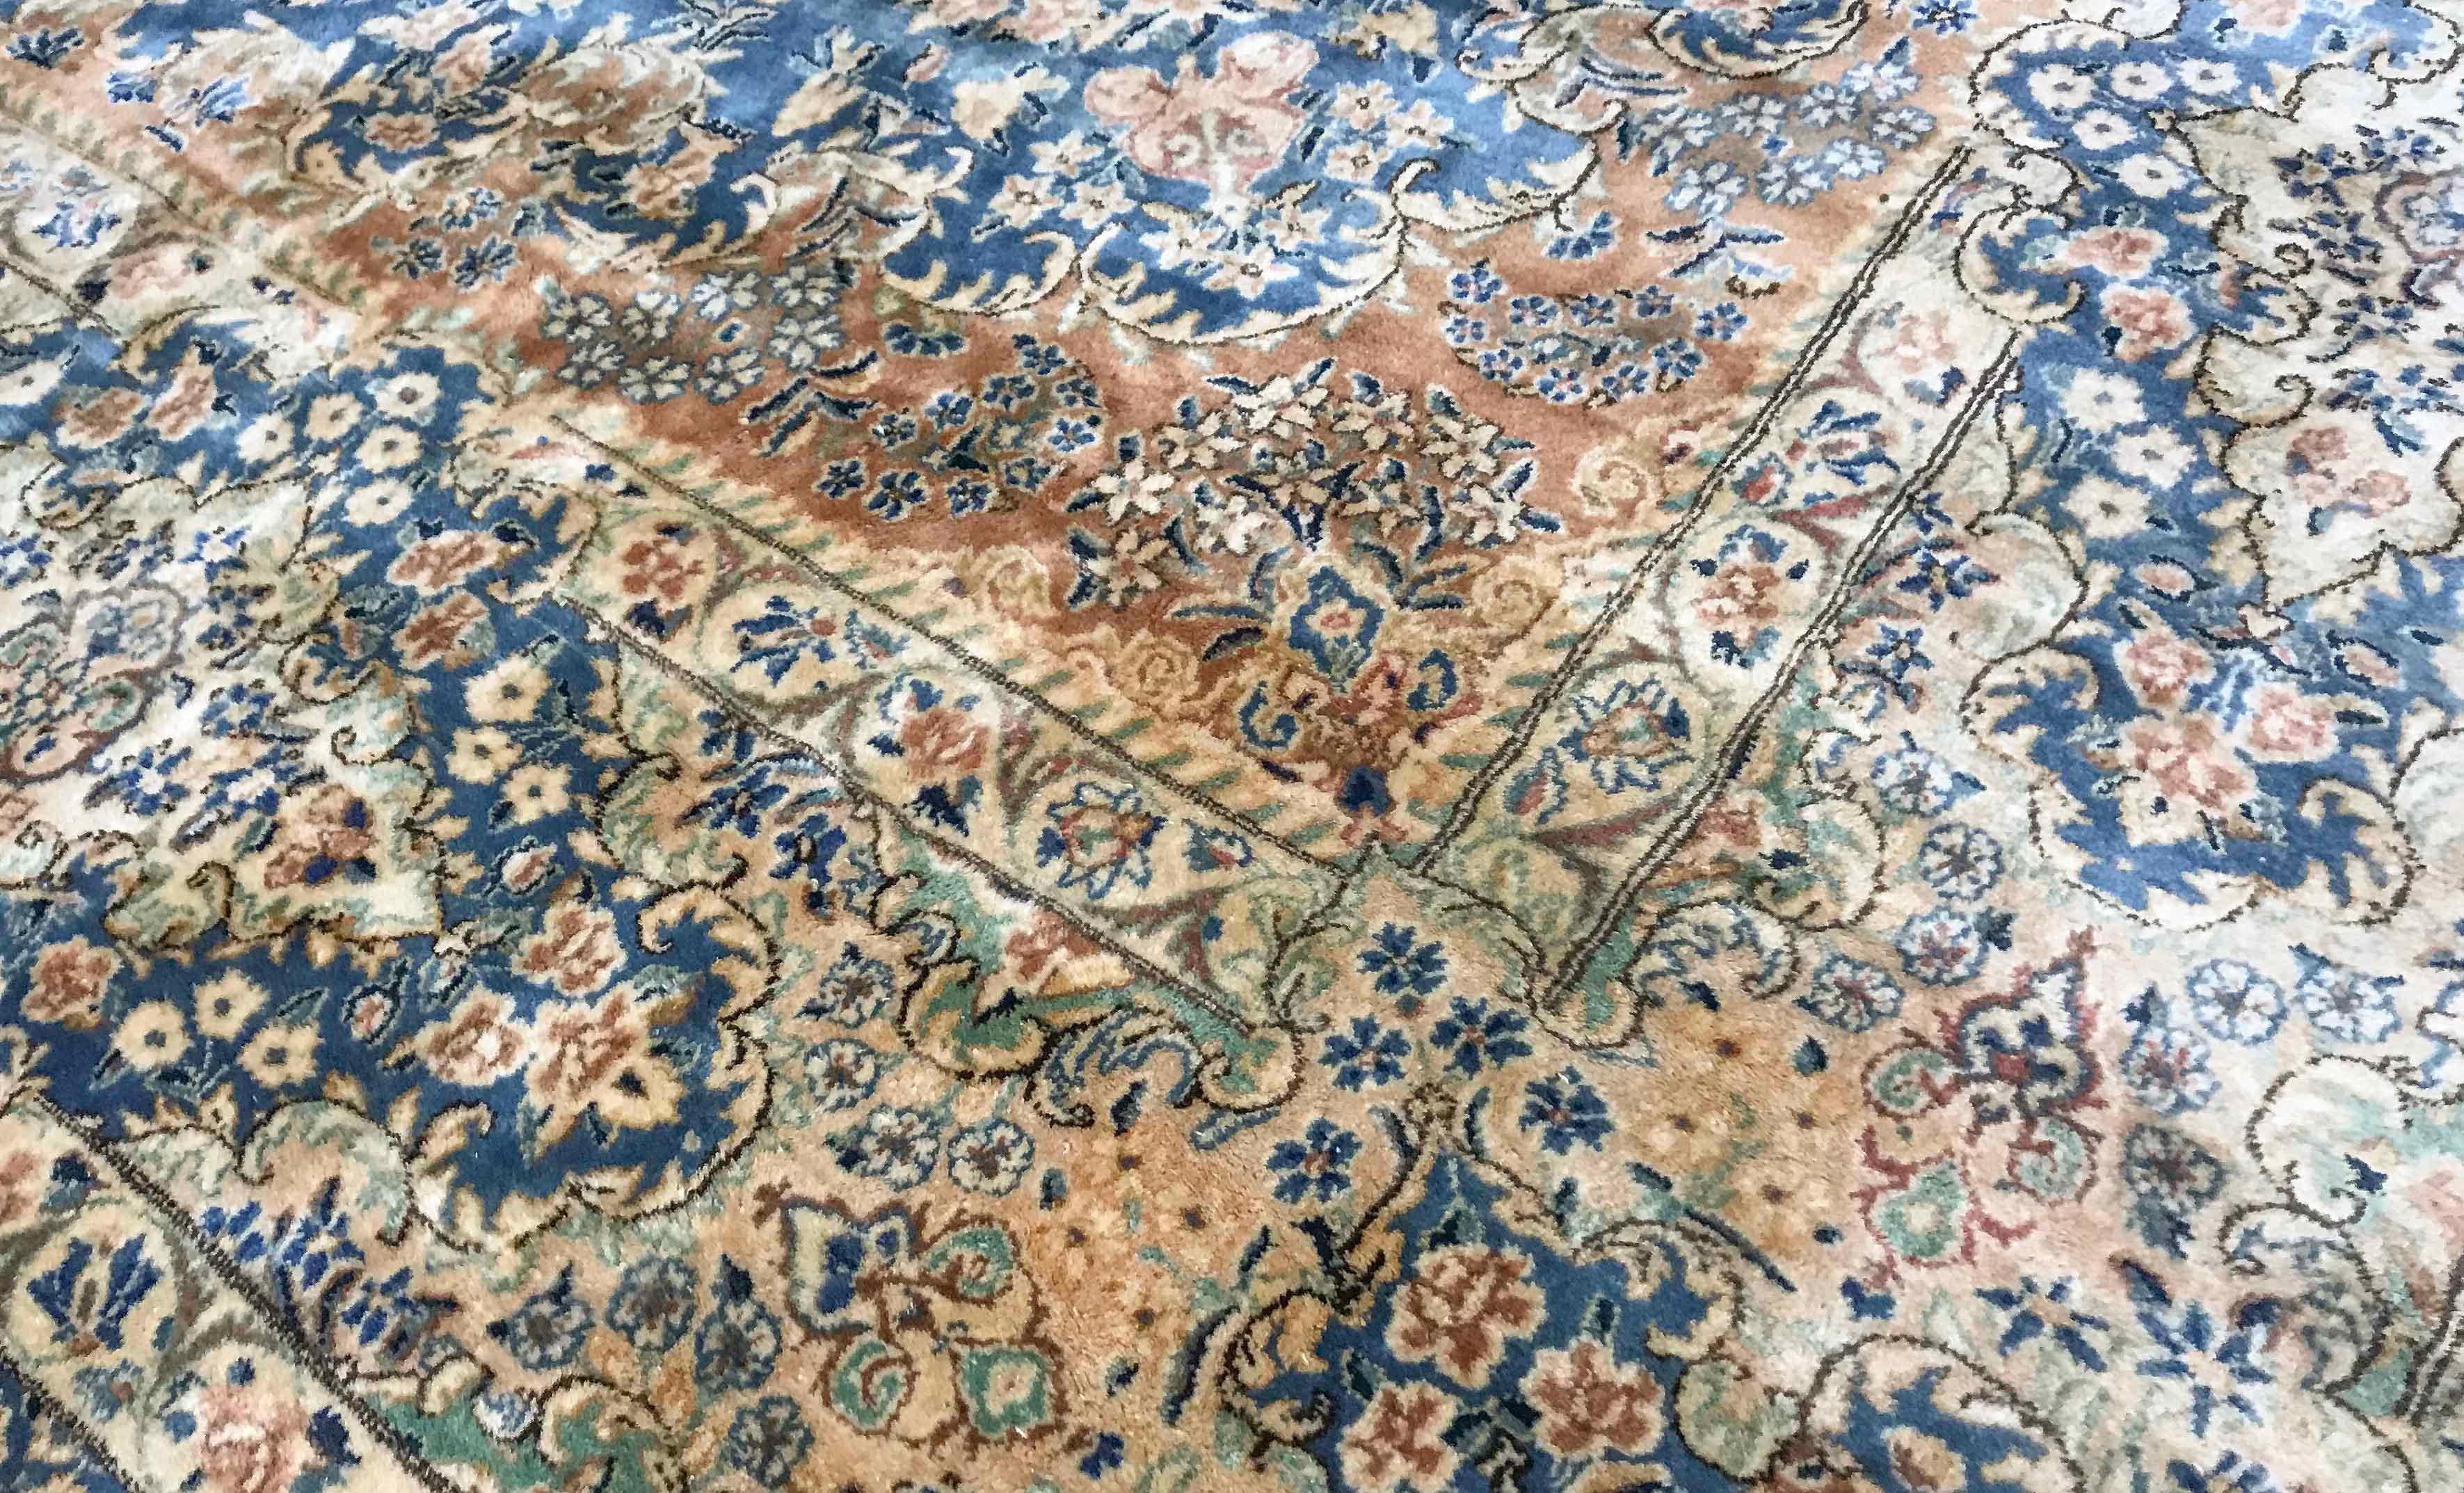 Vintage Persian Kerman rug, circa 1940. This rug is a true work of art the amount of detail woven into this piece is quite amazing from the ivory ground filled to profusion with flowers and vines to the borders again bursting with floral elements a